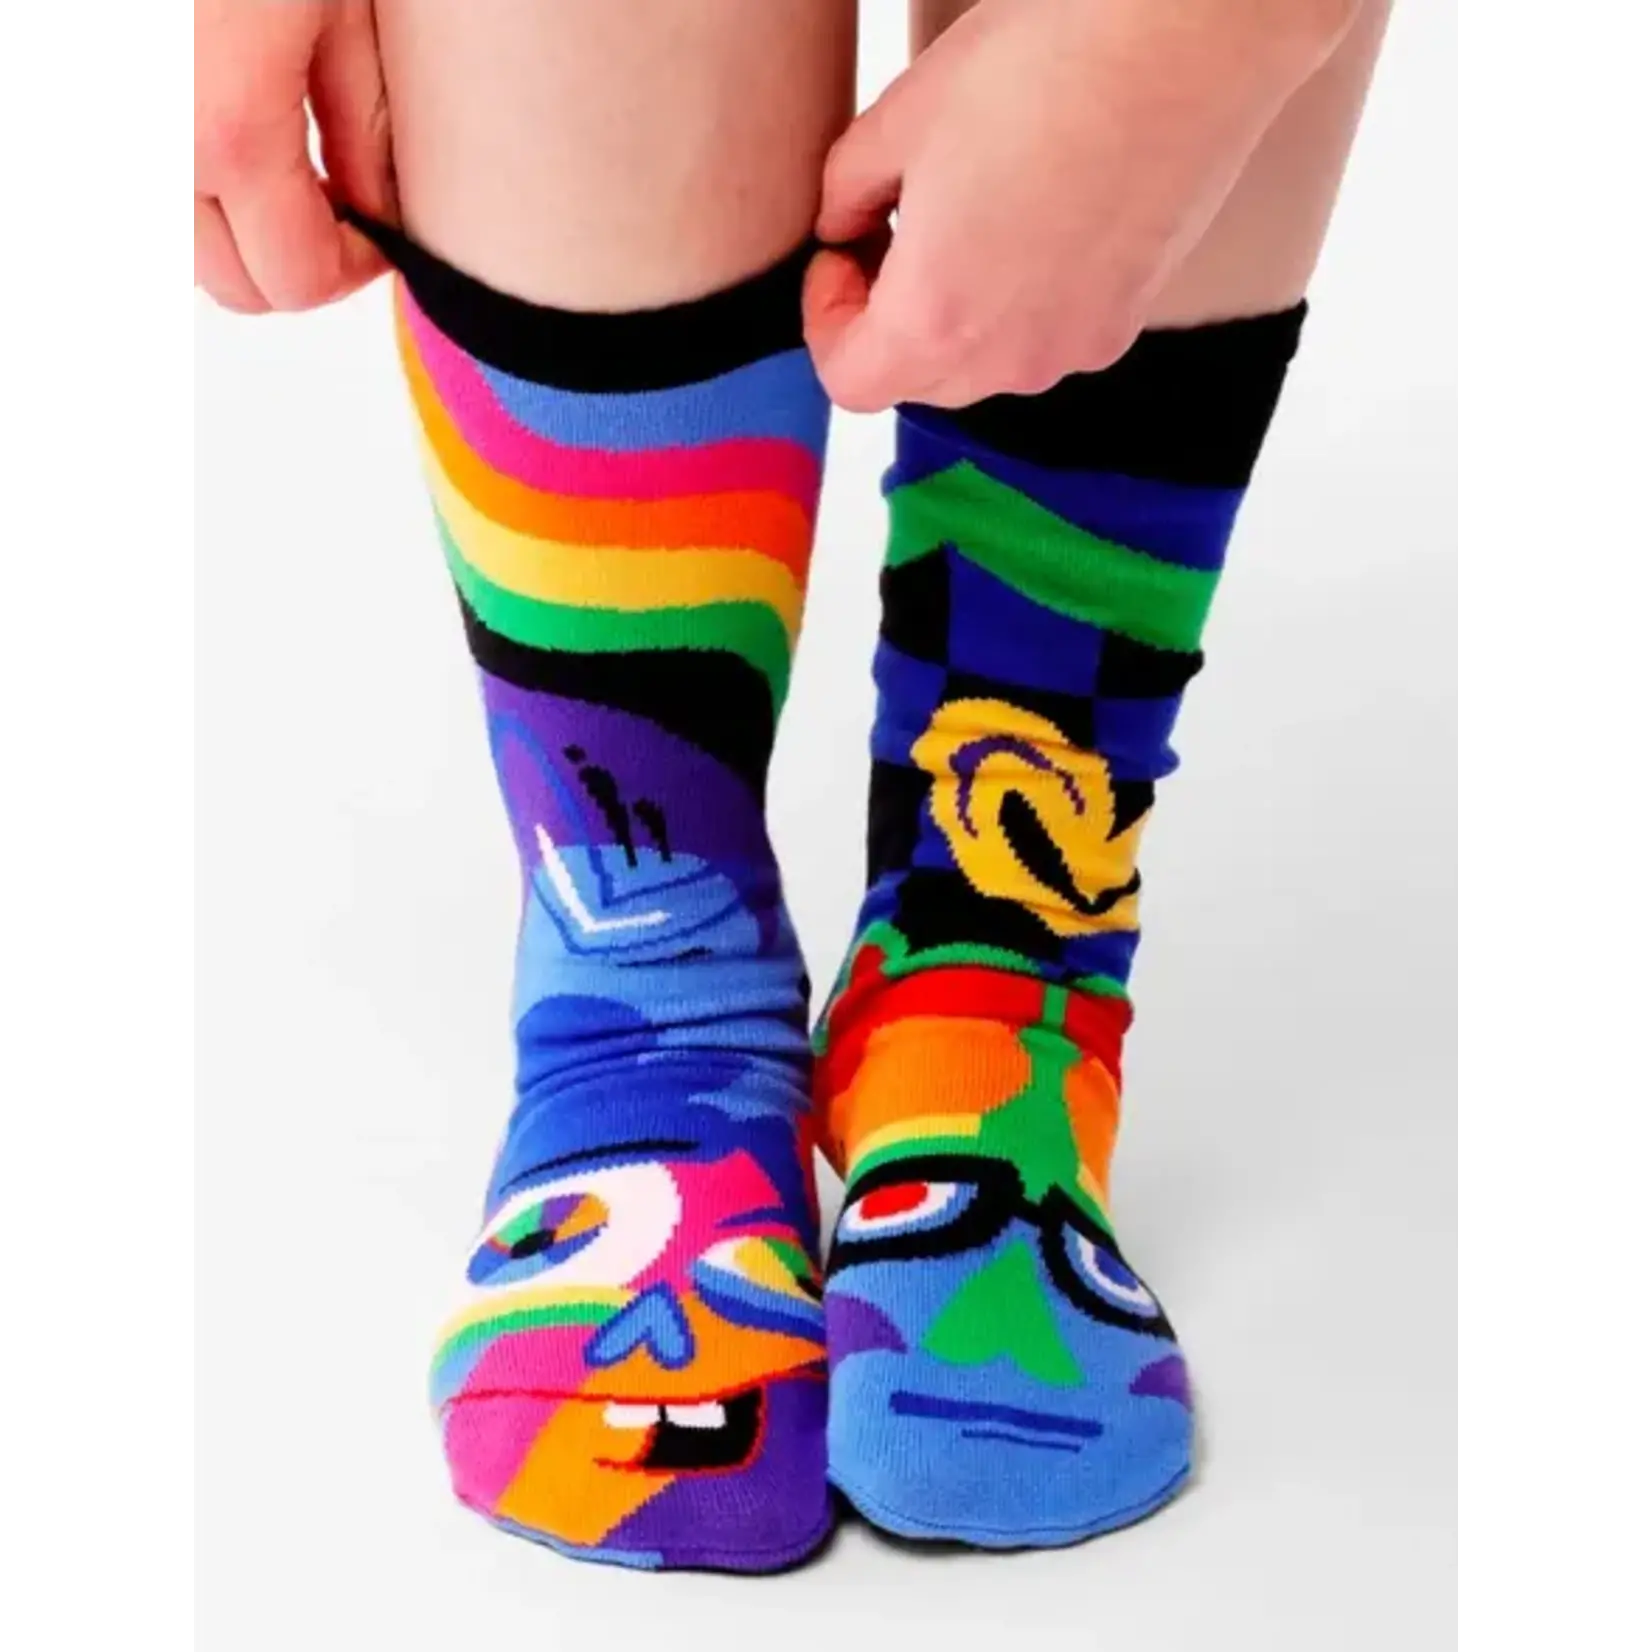 Pals Socks - Silly & Serious, Adult 13+